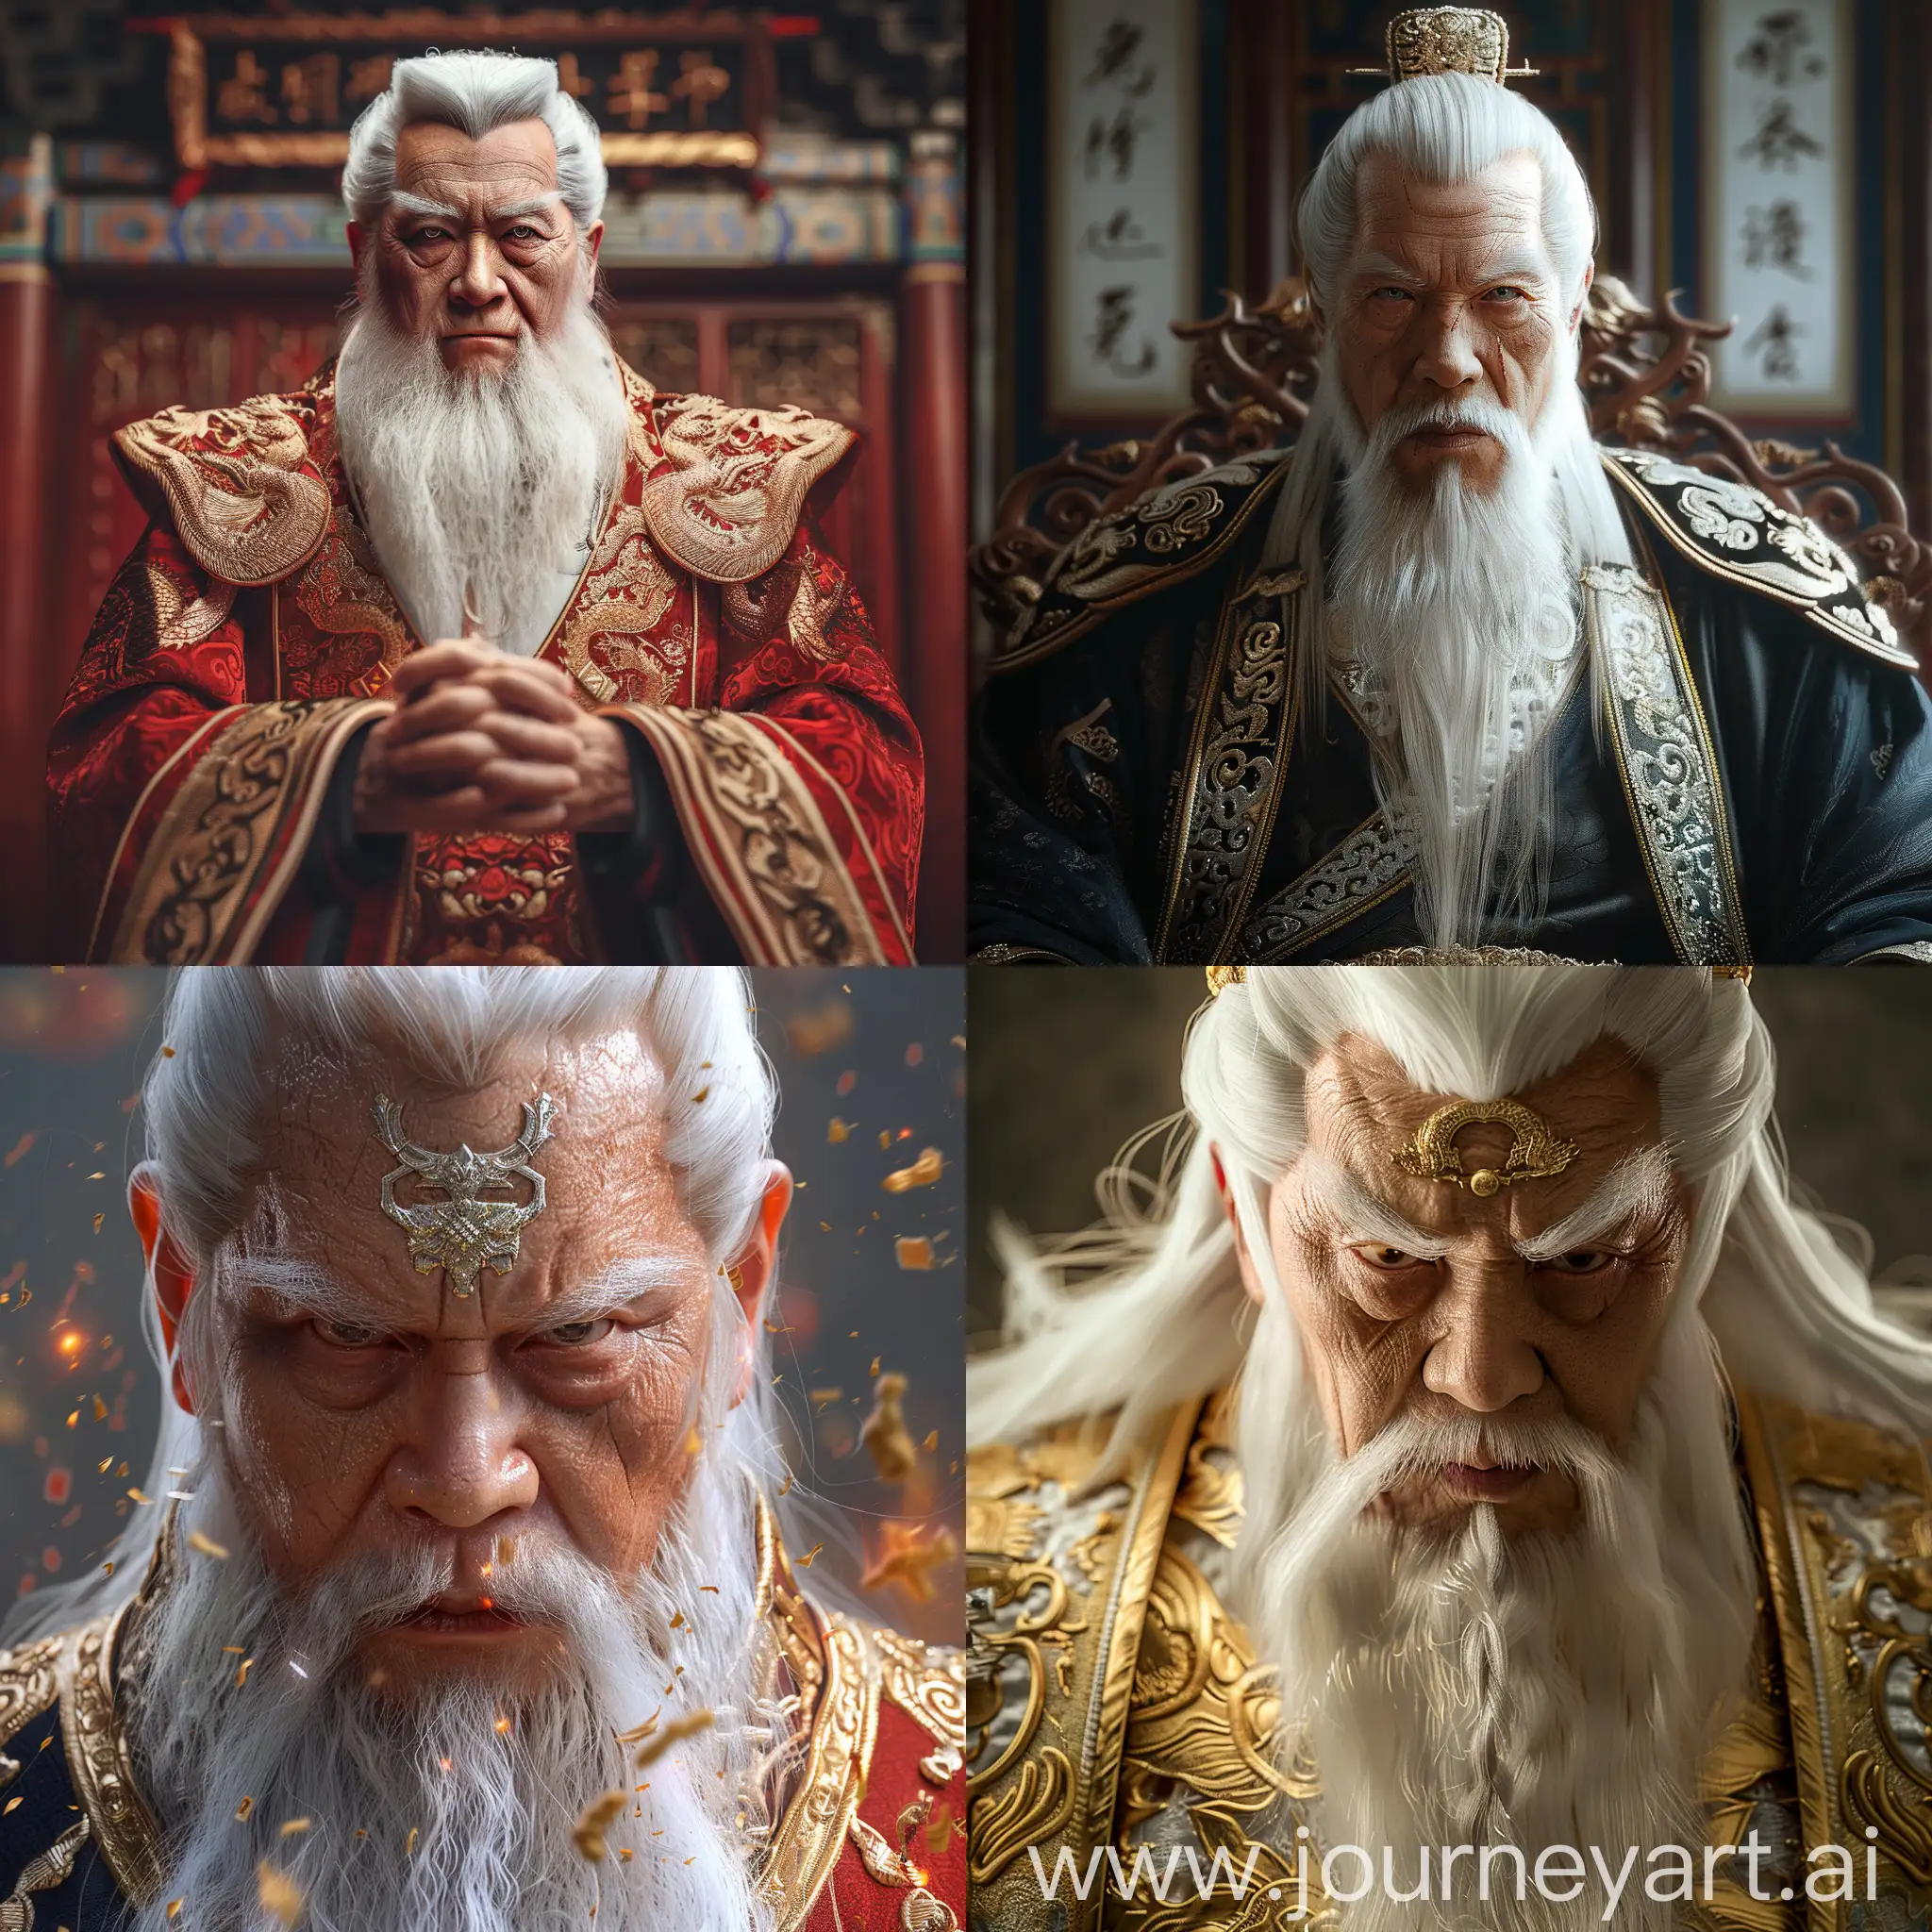 Majestic-8K-Portrait-of-King-Yeomra-the-Spiritual-Chinese-Monarch-with-a-Commanding-Presence